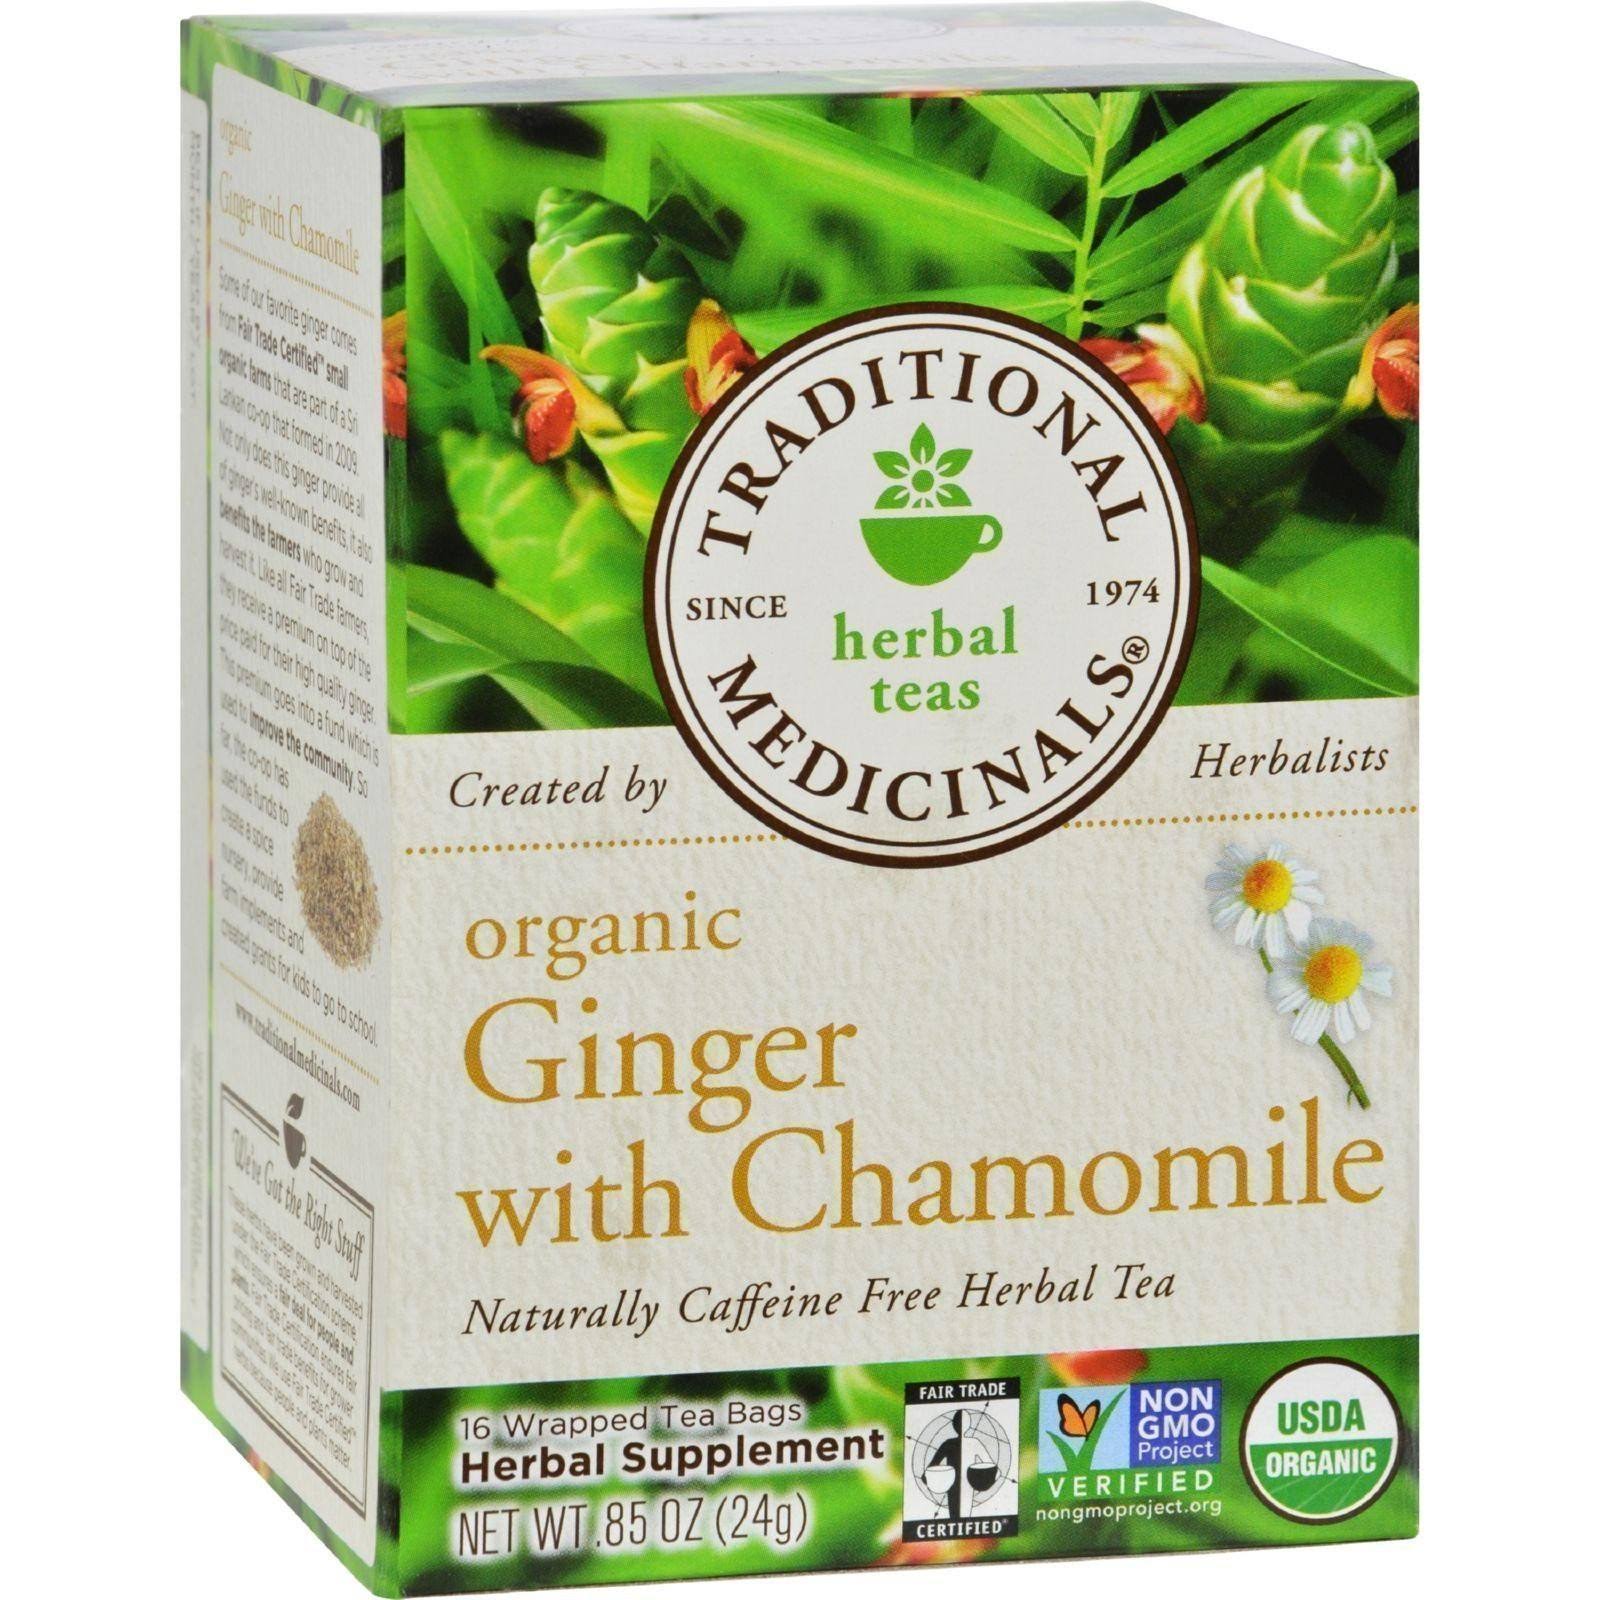 Traditional Medicinals Organic Ginger with Chamomile Tea - 16 tea bags